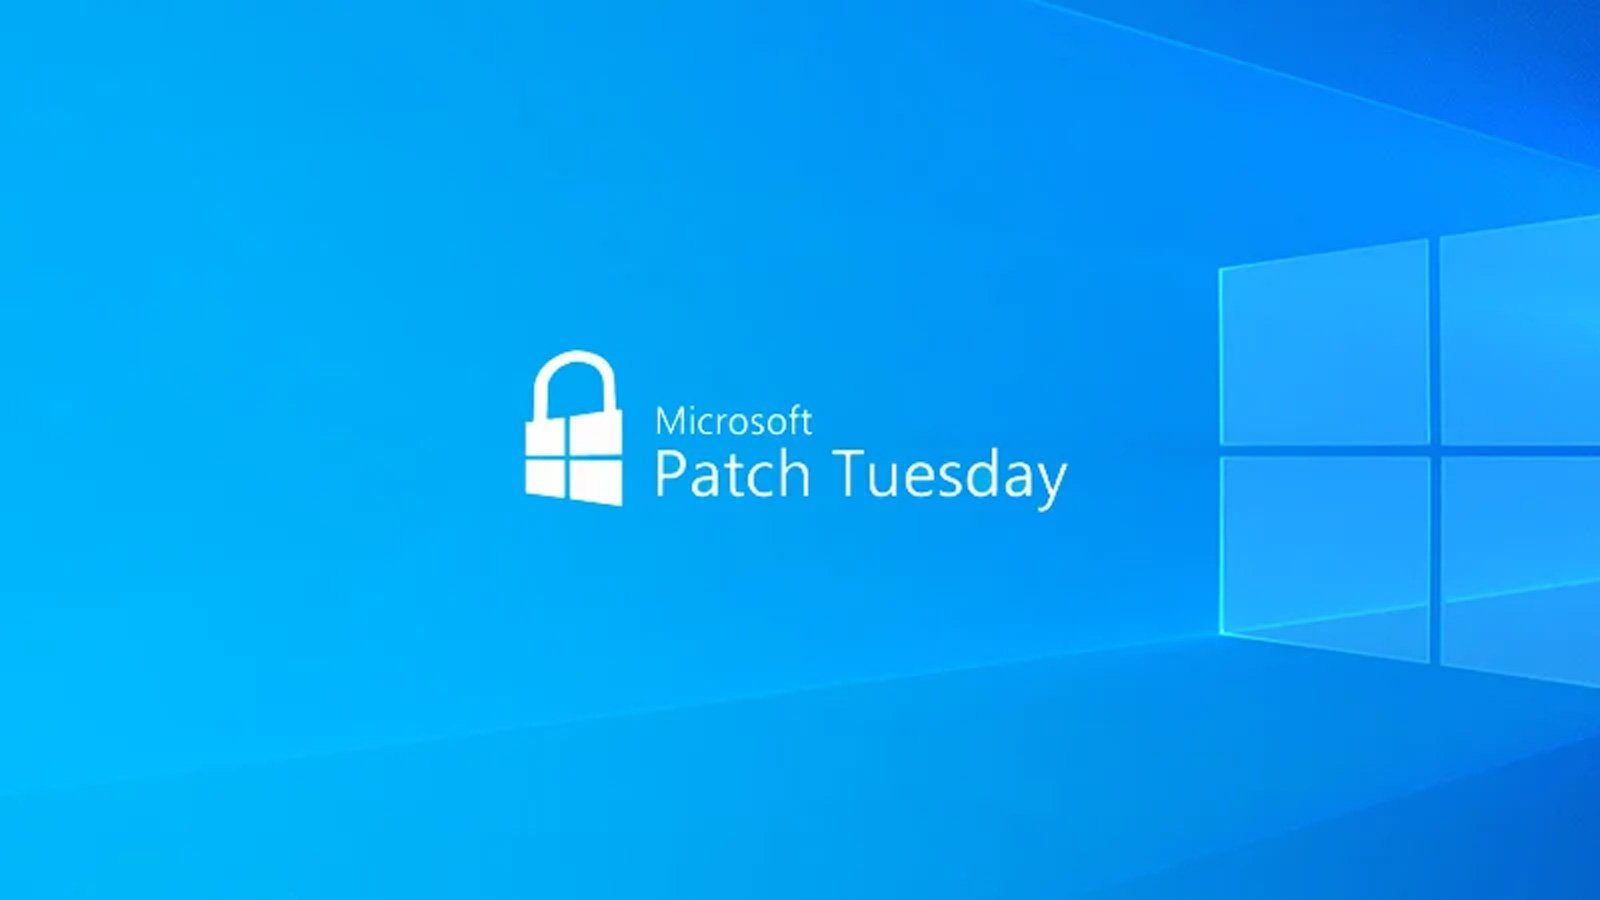 Microsoft May 2023 Patch Tuesday fixes 3 zero-days, 38 flaws – Source: www.bleepingcomputer.com